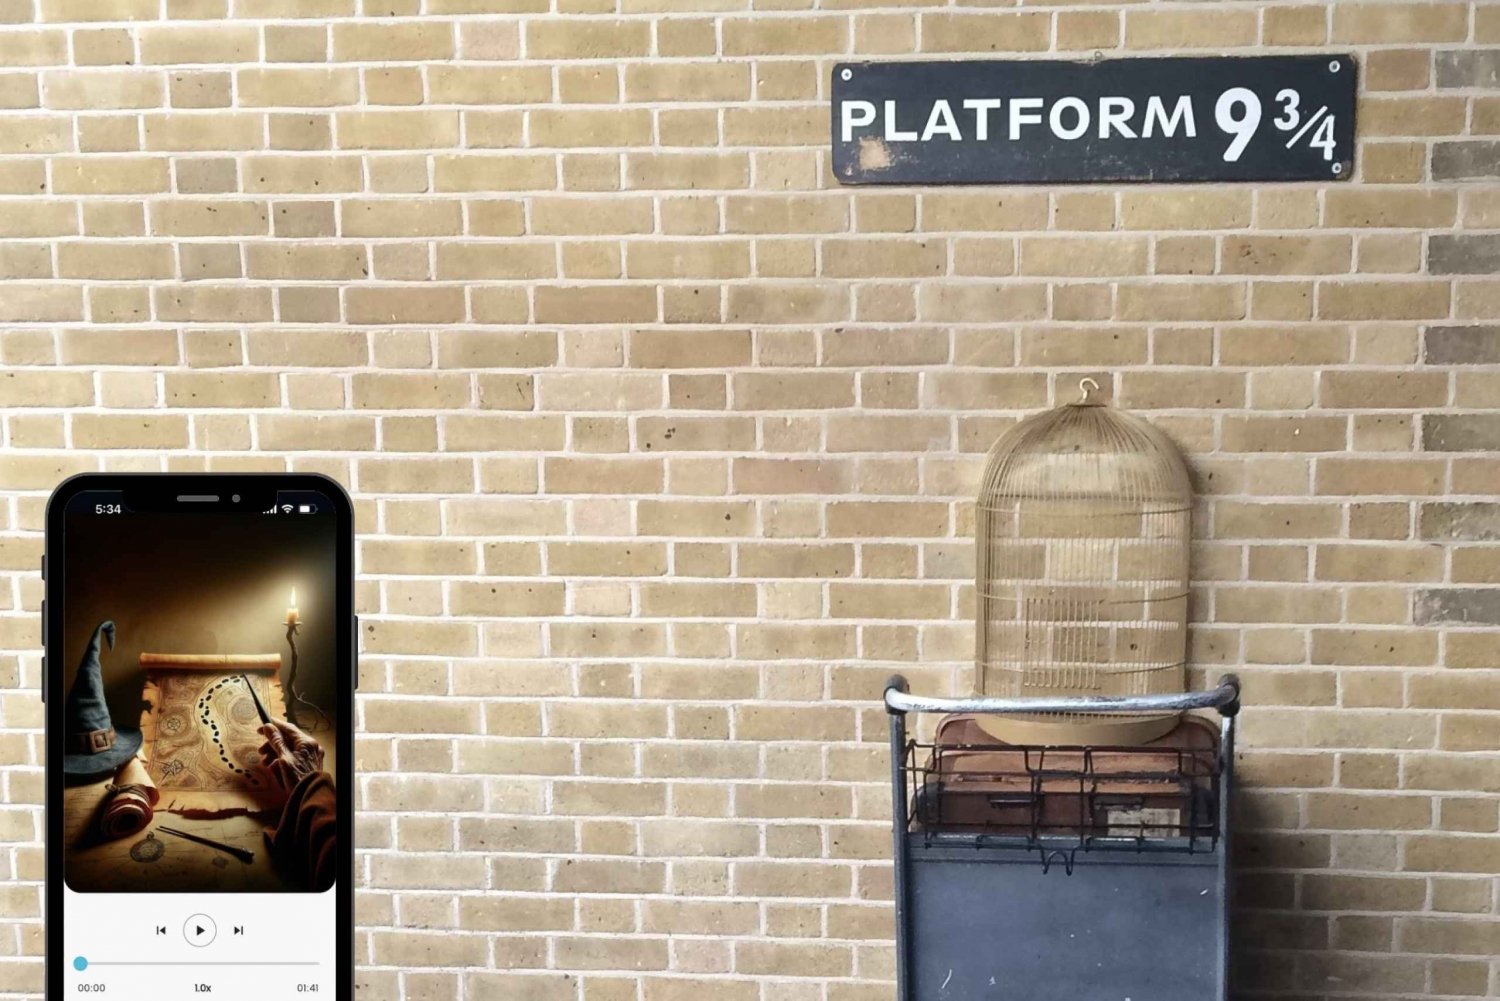 Harry Potter's London: self-guided express tour with an app